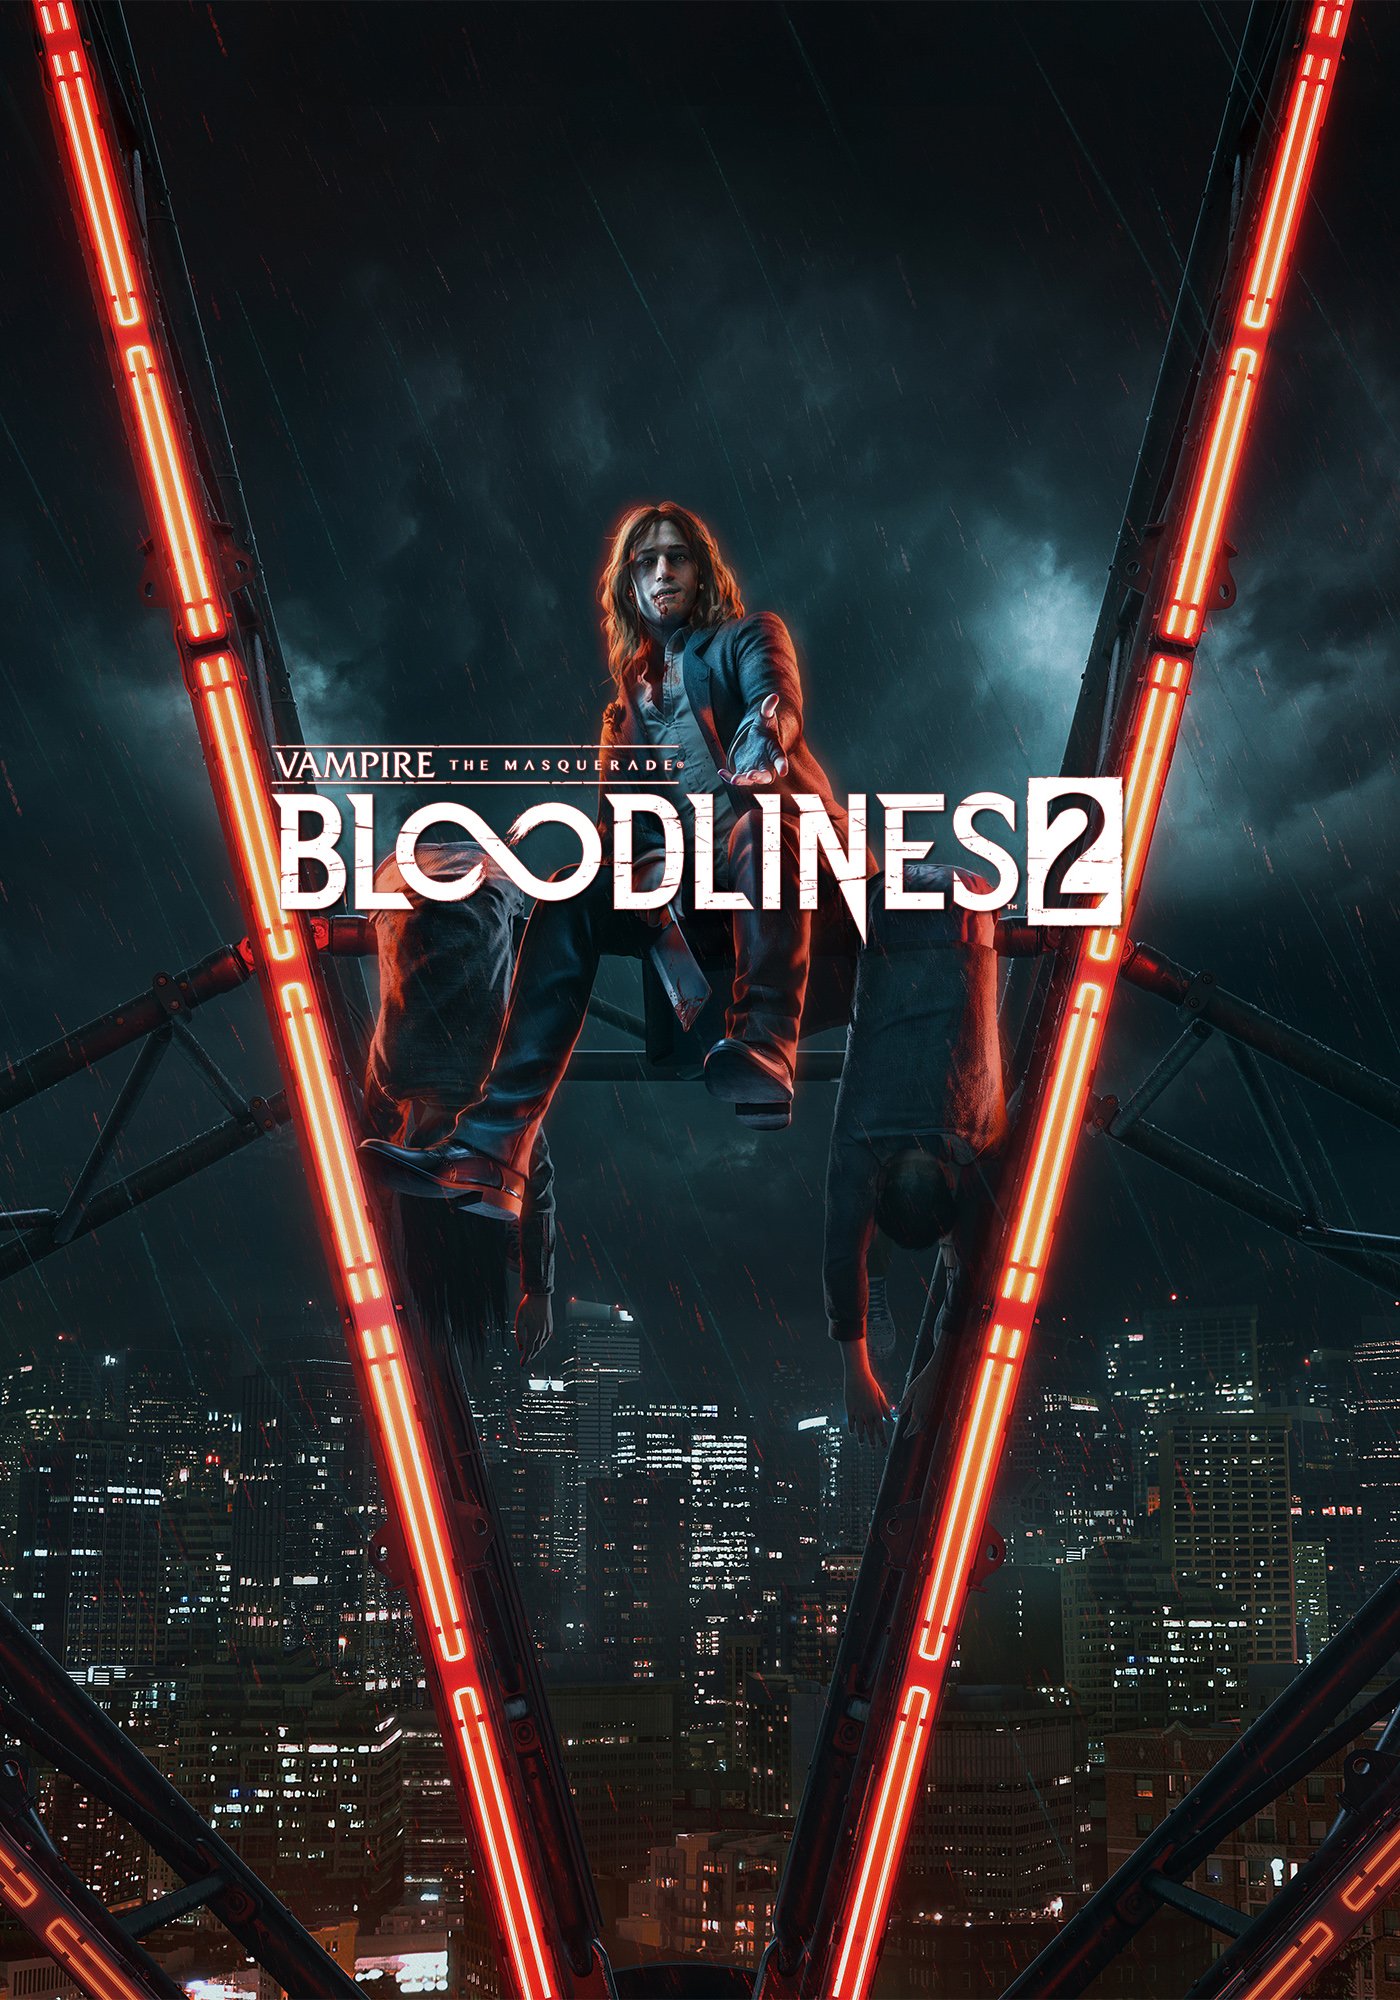 Image of Vampire: The Masquerade - Bloodlines 2